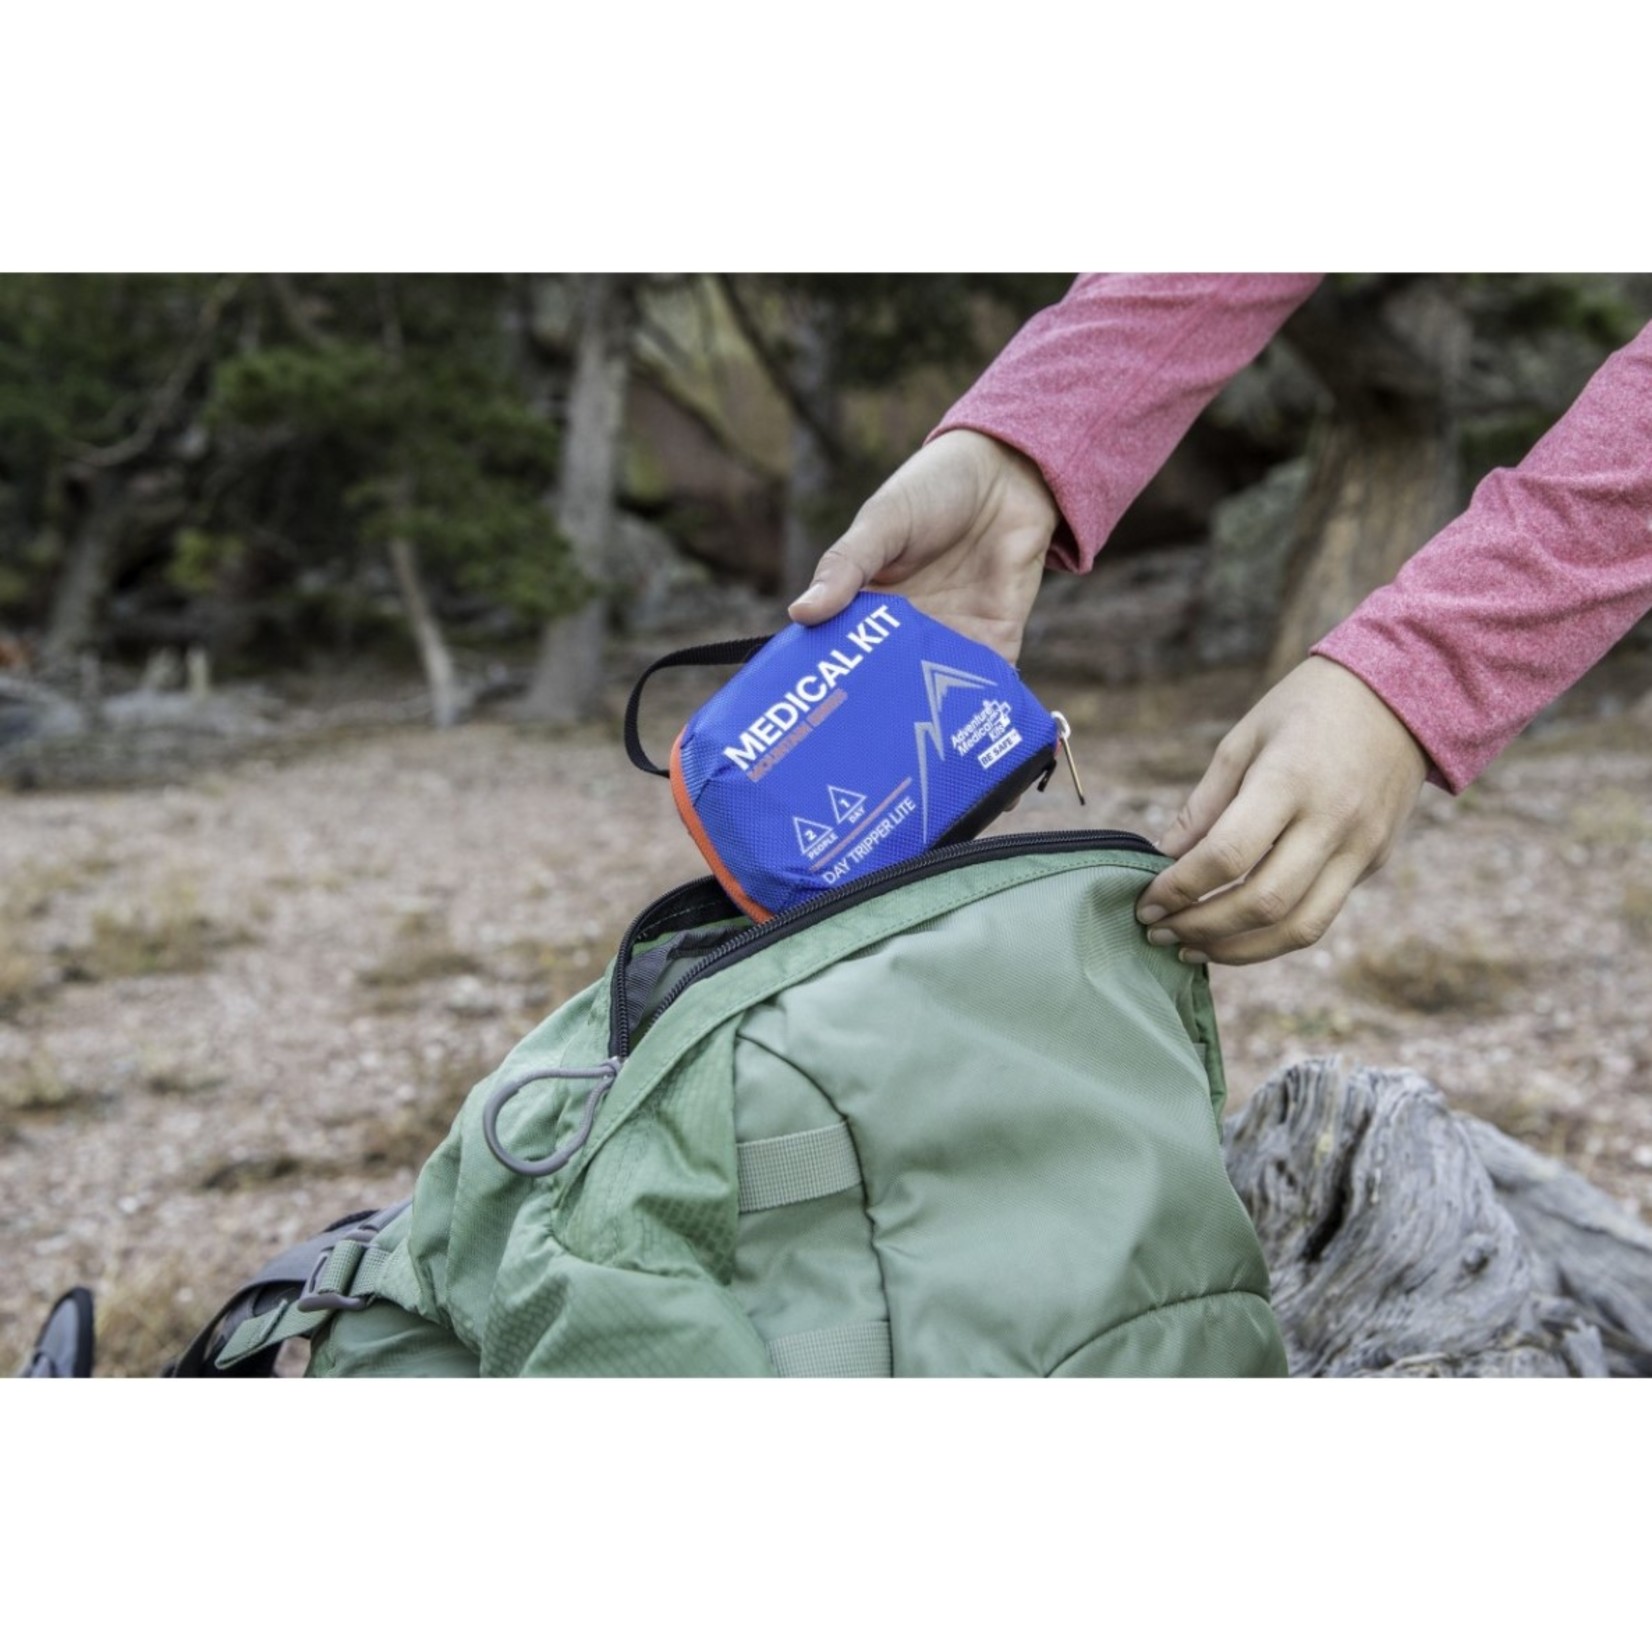 Adventure Medical Kits Mountain Series Day Tripper